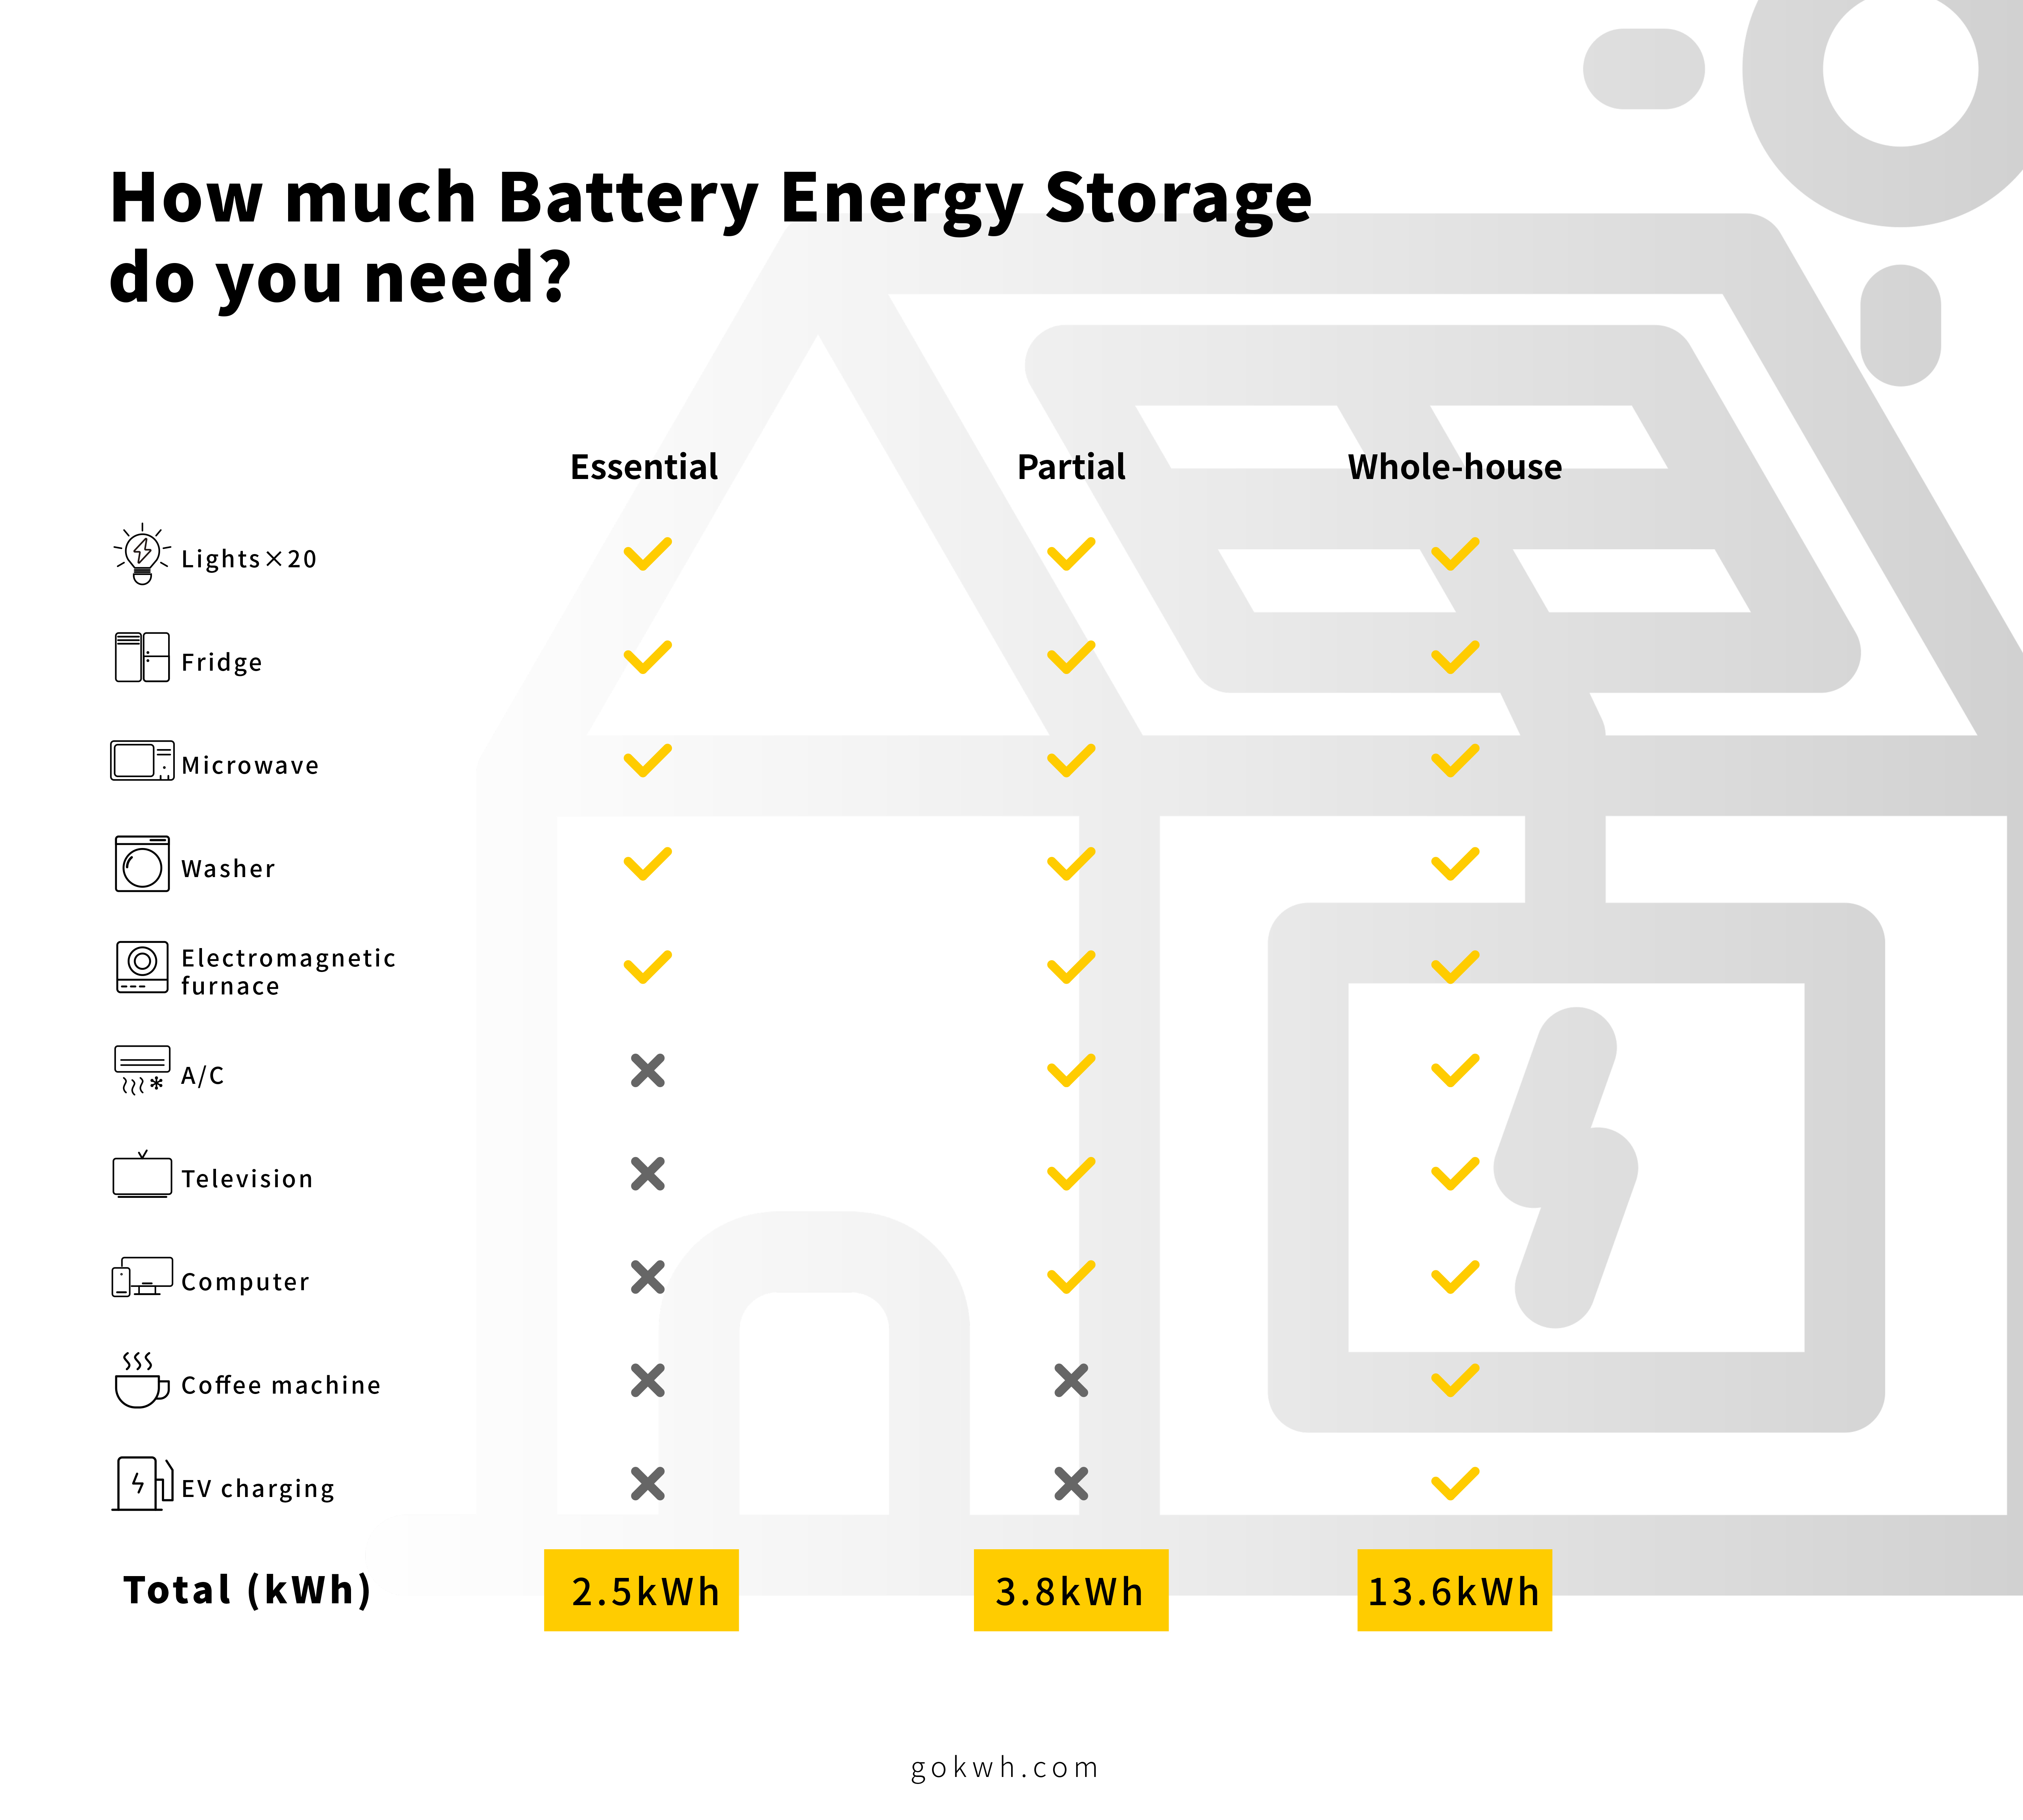 How Much Battery Energy Storage Do You Need?